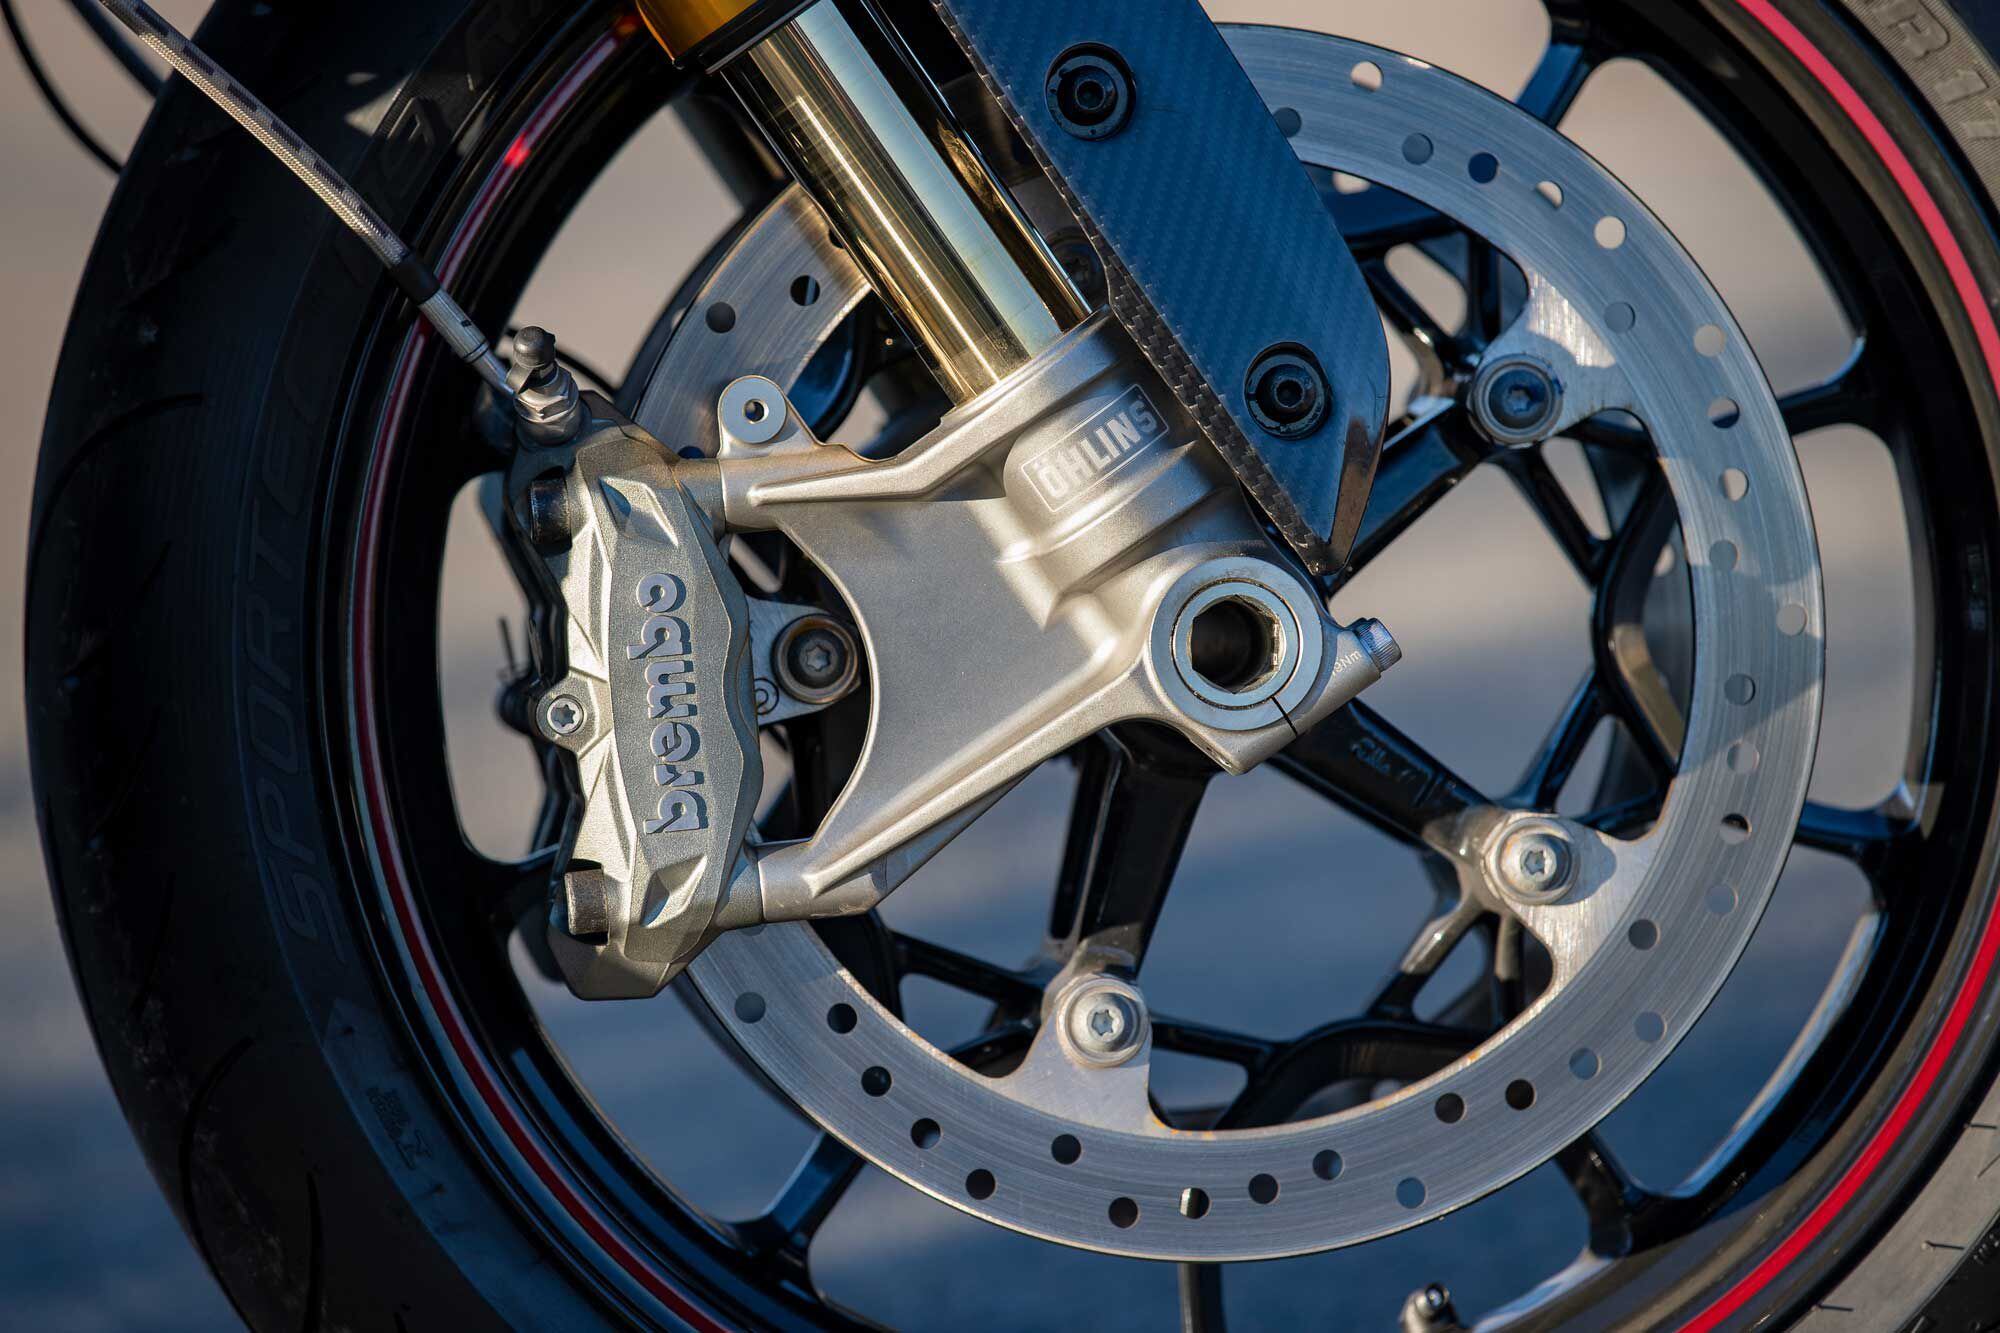 Dual hydraulic disc brakes from Brembo with cornering ABS shed speed from the 513-pound FTR Carbon R.